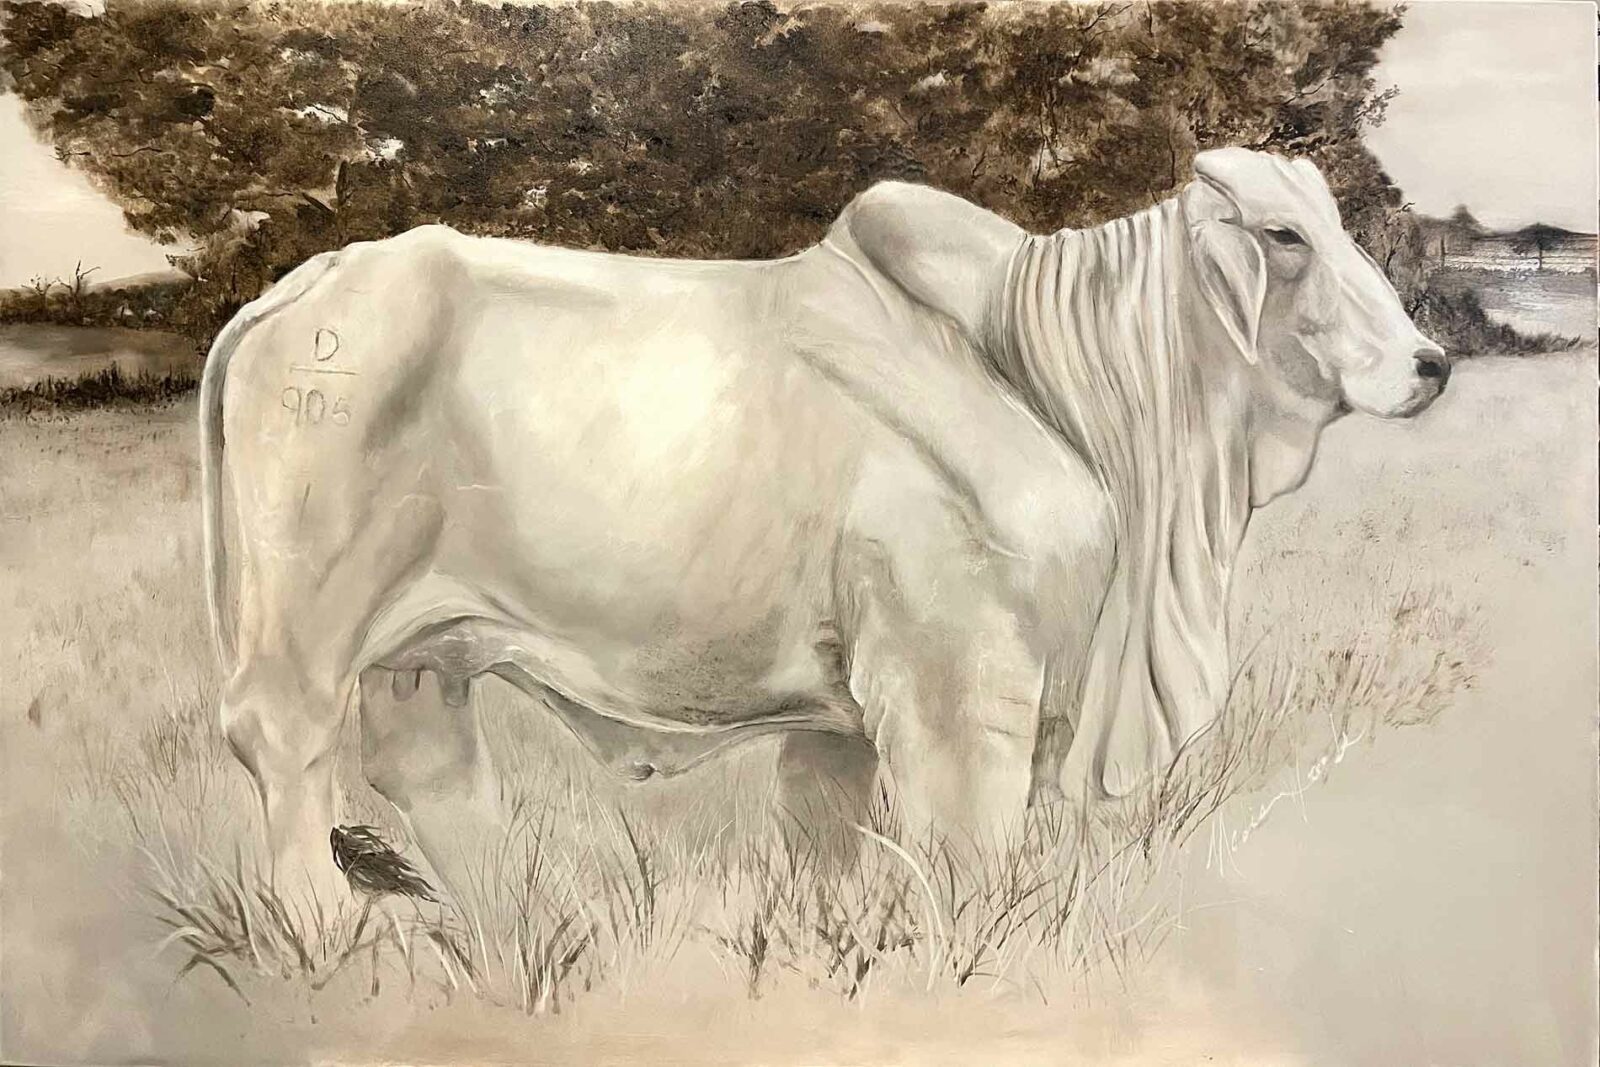 This Brahman I think is the best example of my growth as an artist.